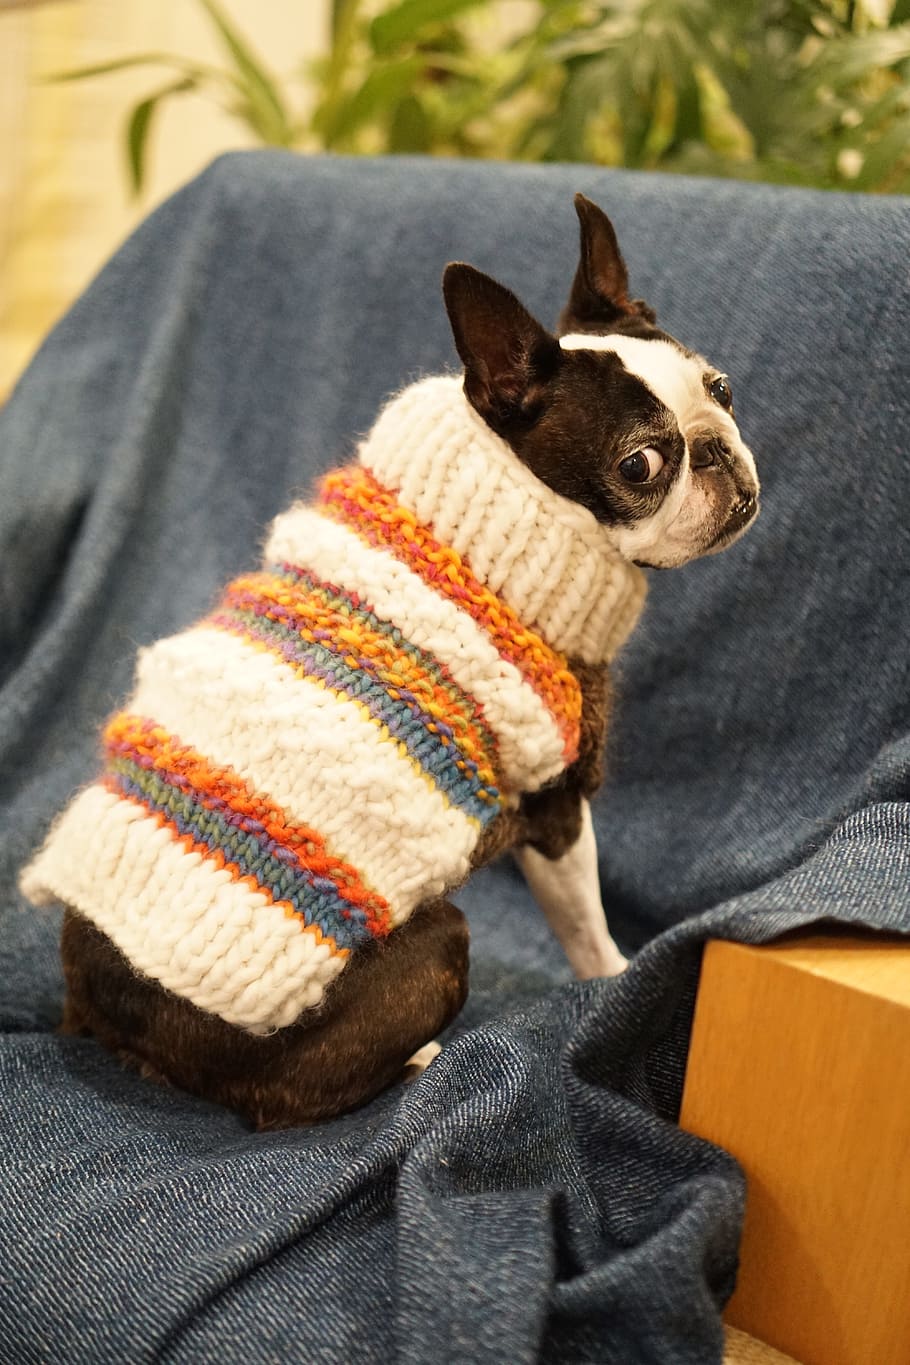 Boston Terrier, Pet, Dog, small breed dogs, indoor dog, sweater, dog clothes, dog sweater, sitting, pets